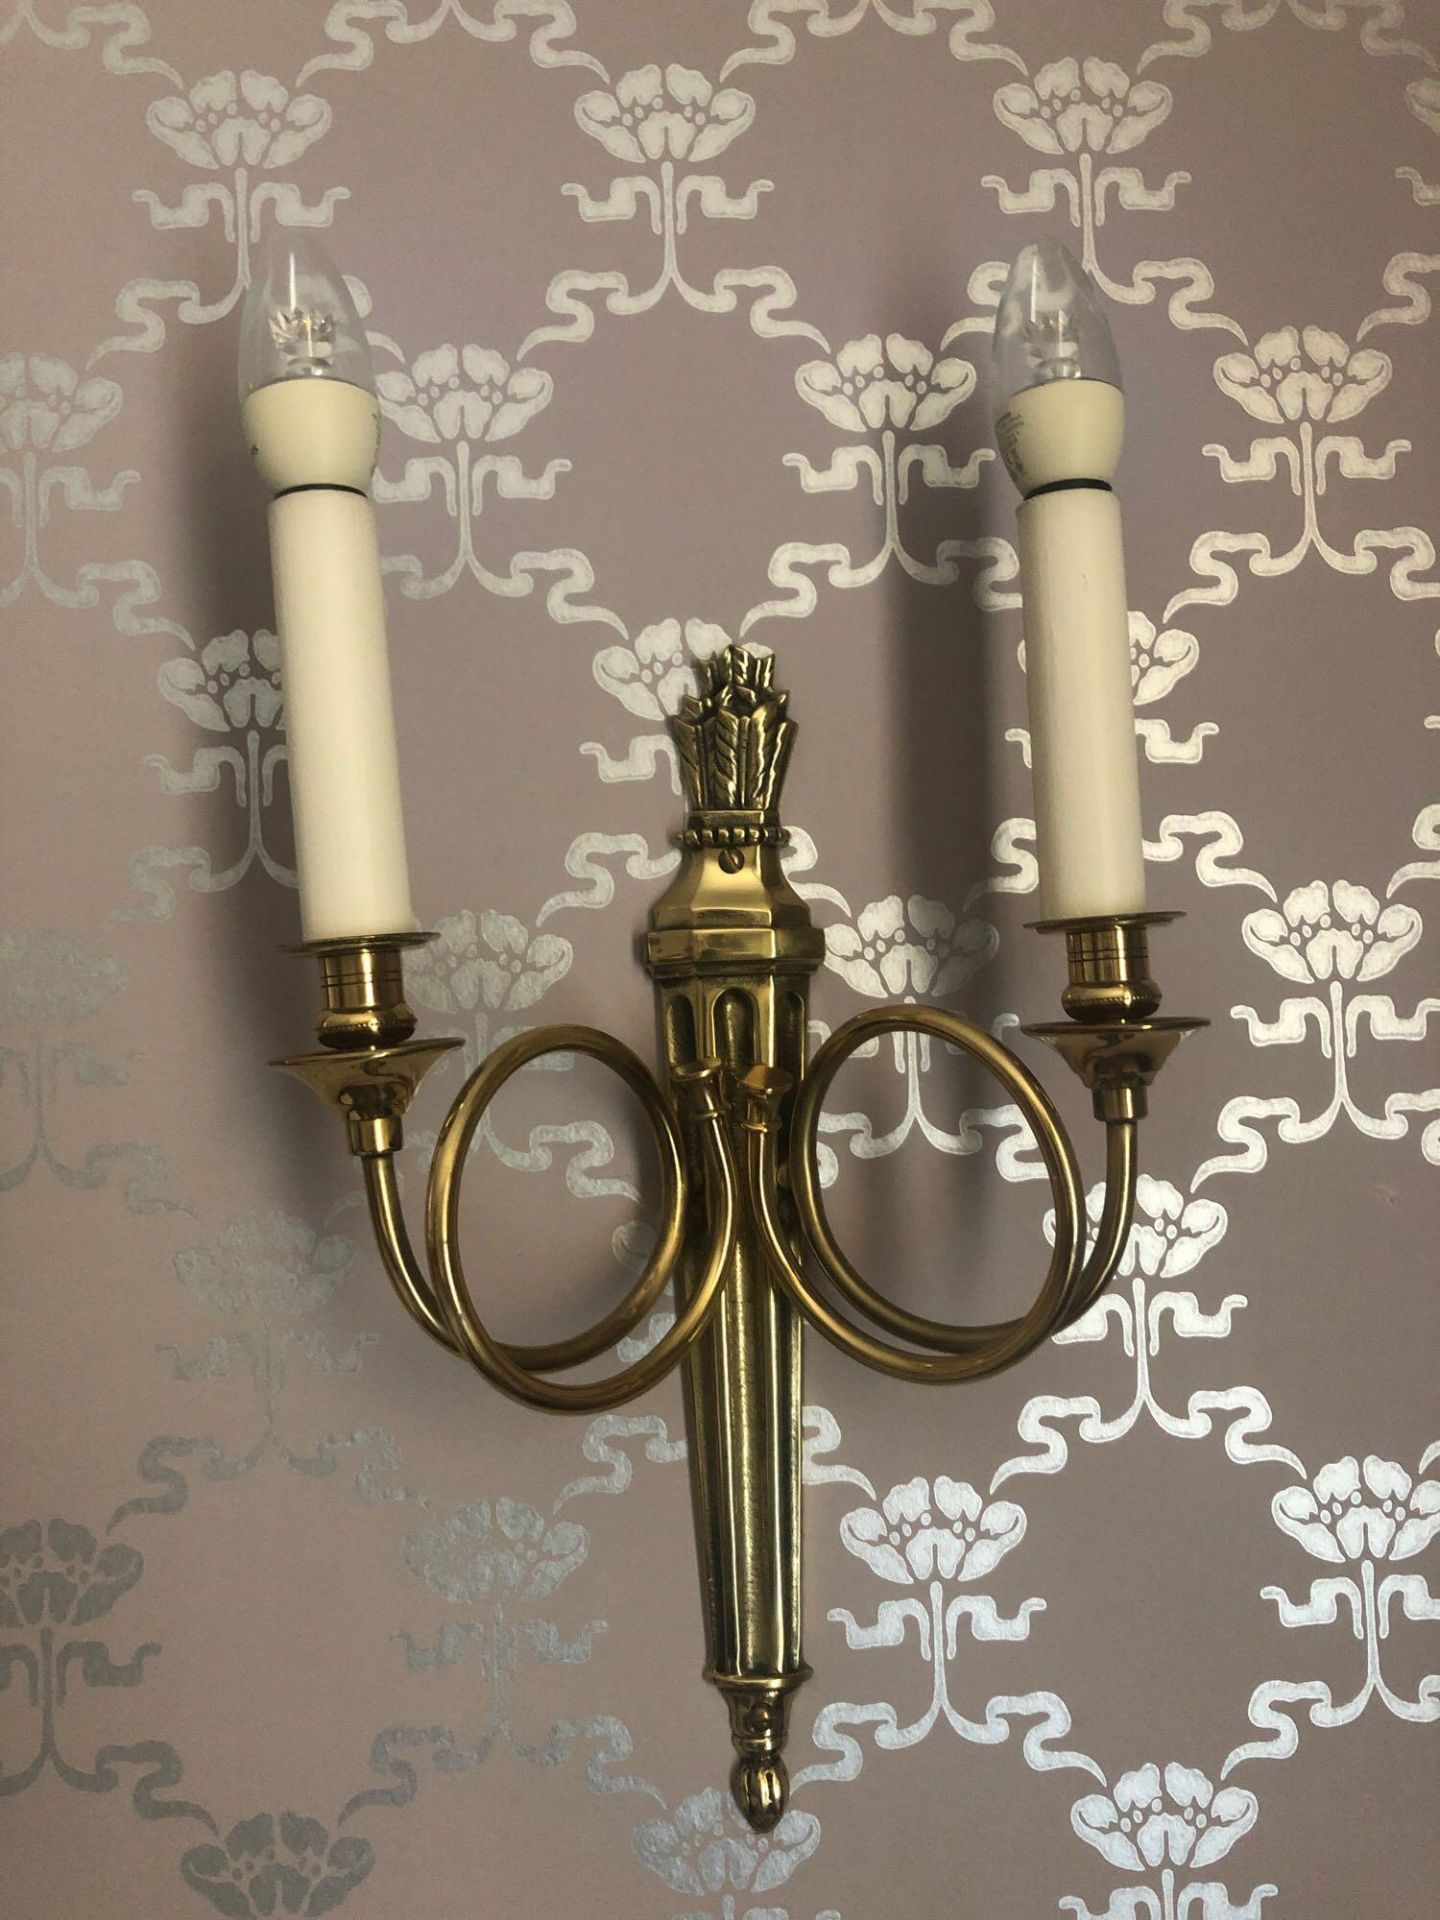 A Pair Of Wall Appliques Twin Arm Capped Scroll Arms Issuing From A Well-Cast Single Decorative